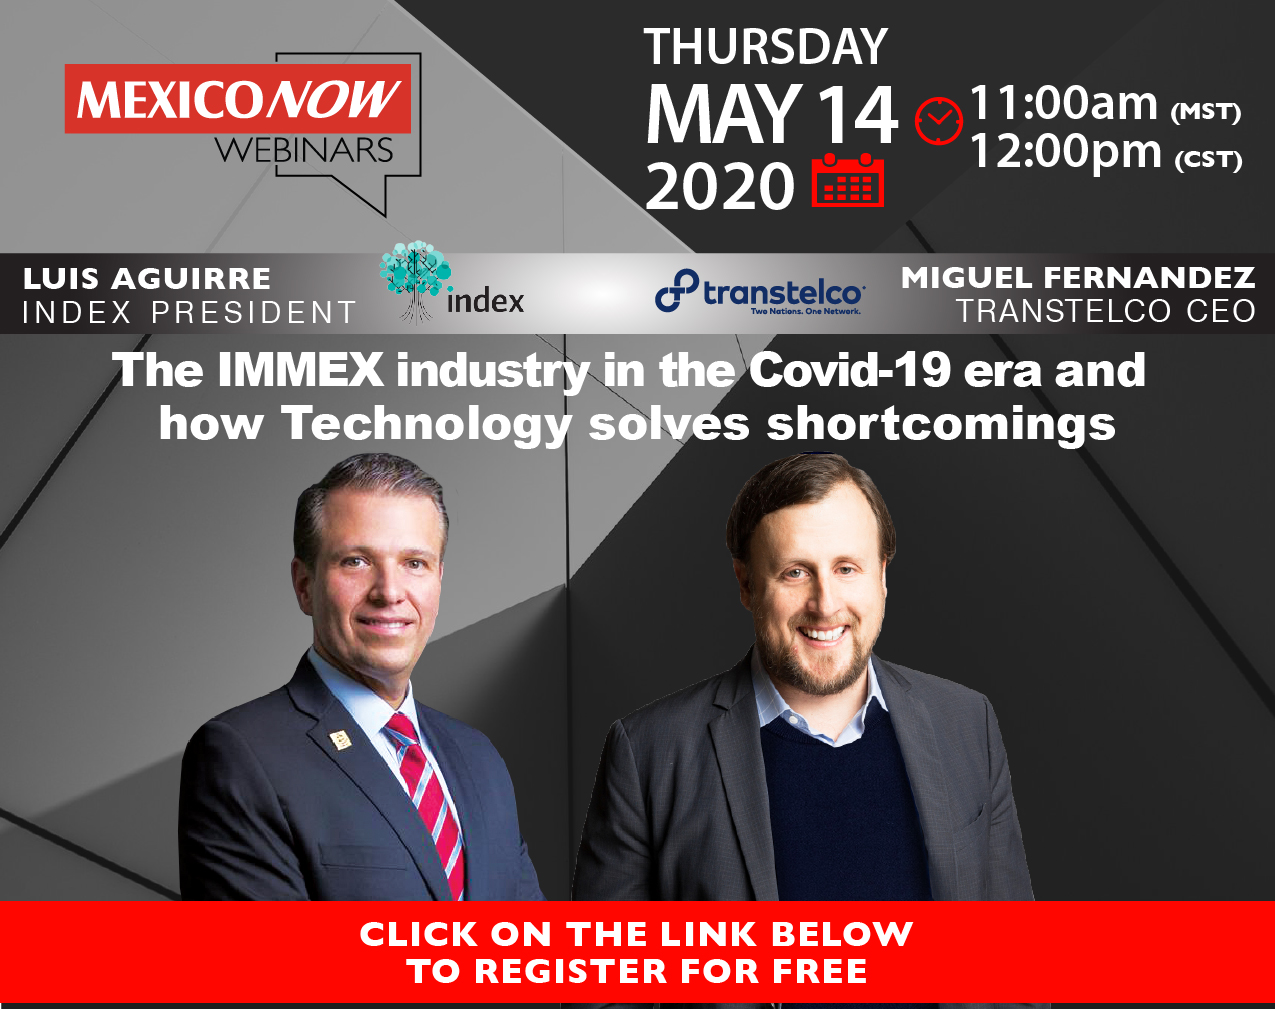 MEXICONOW – Webinars: The IMMEX industry in the COVID-19 era and how Technology solves shortcomings